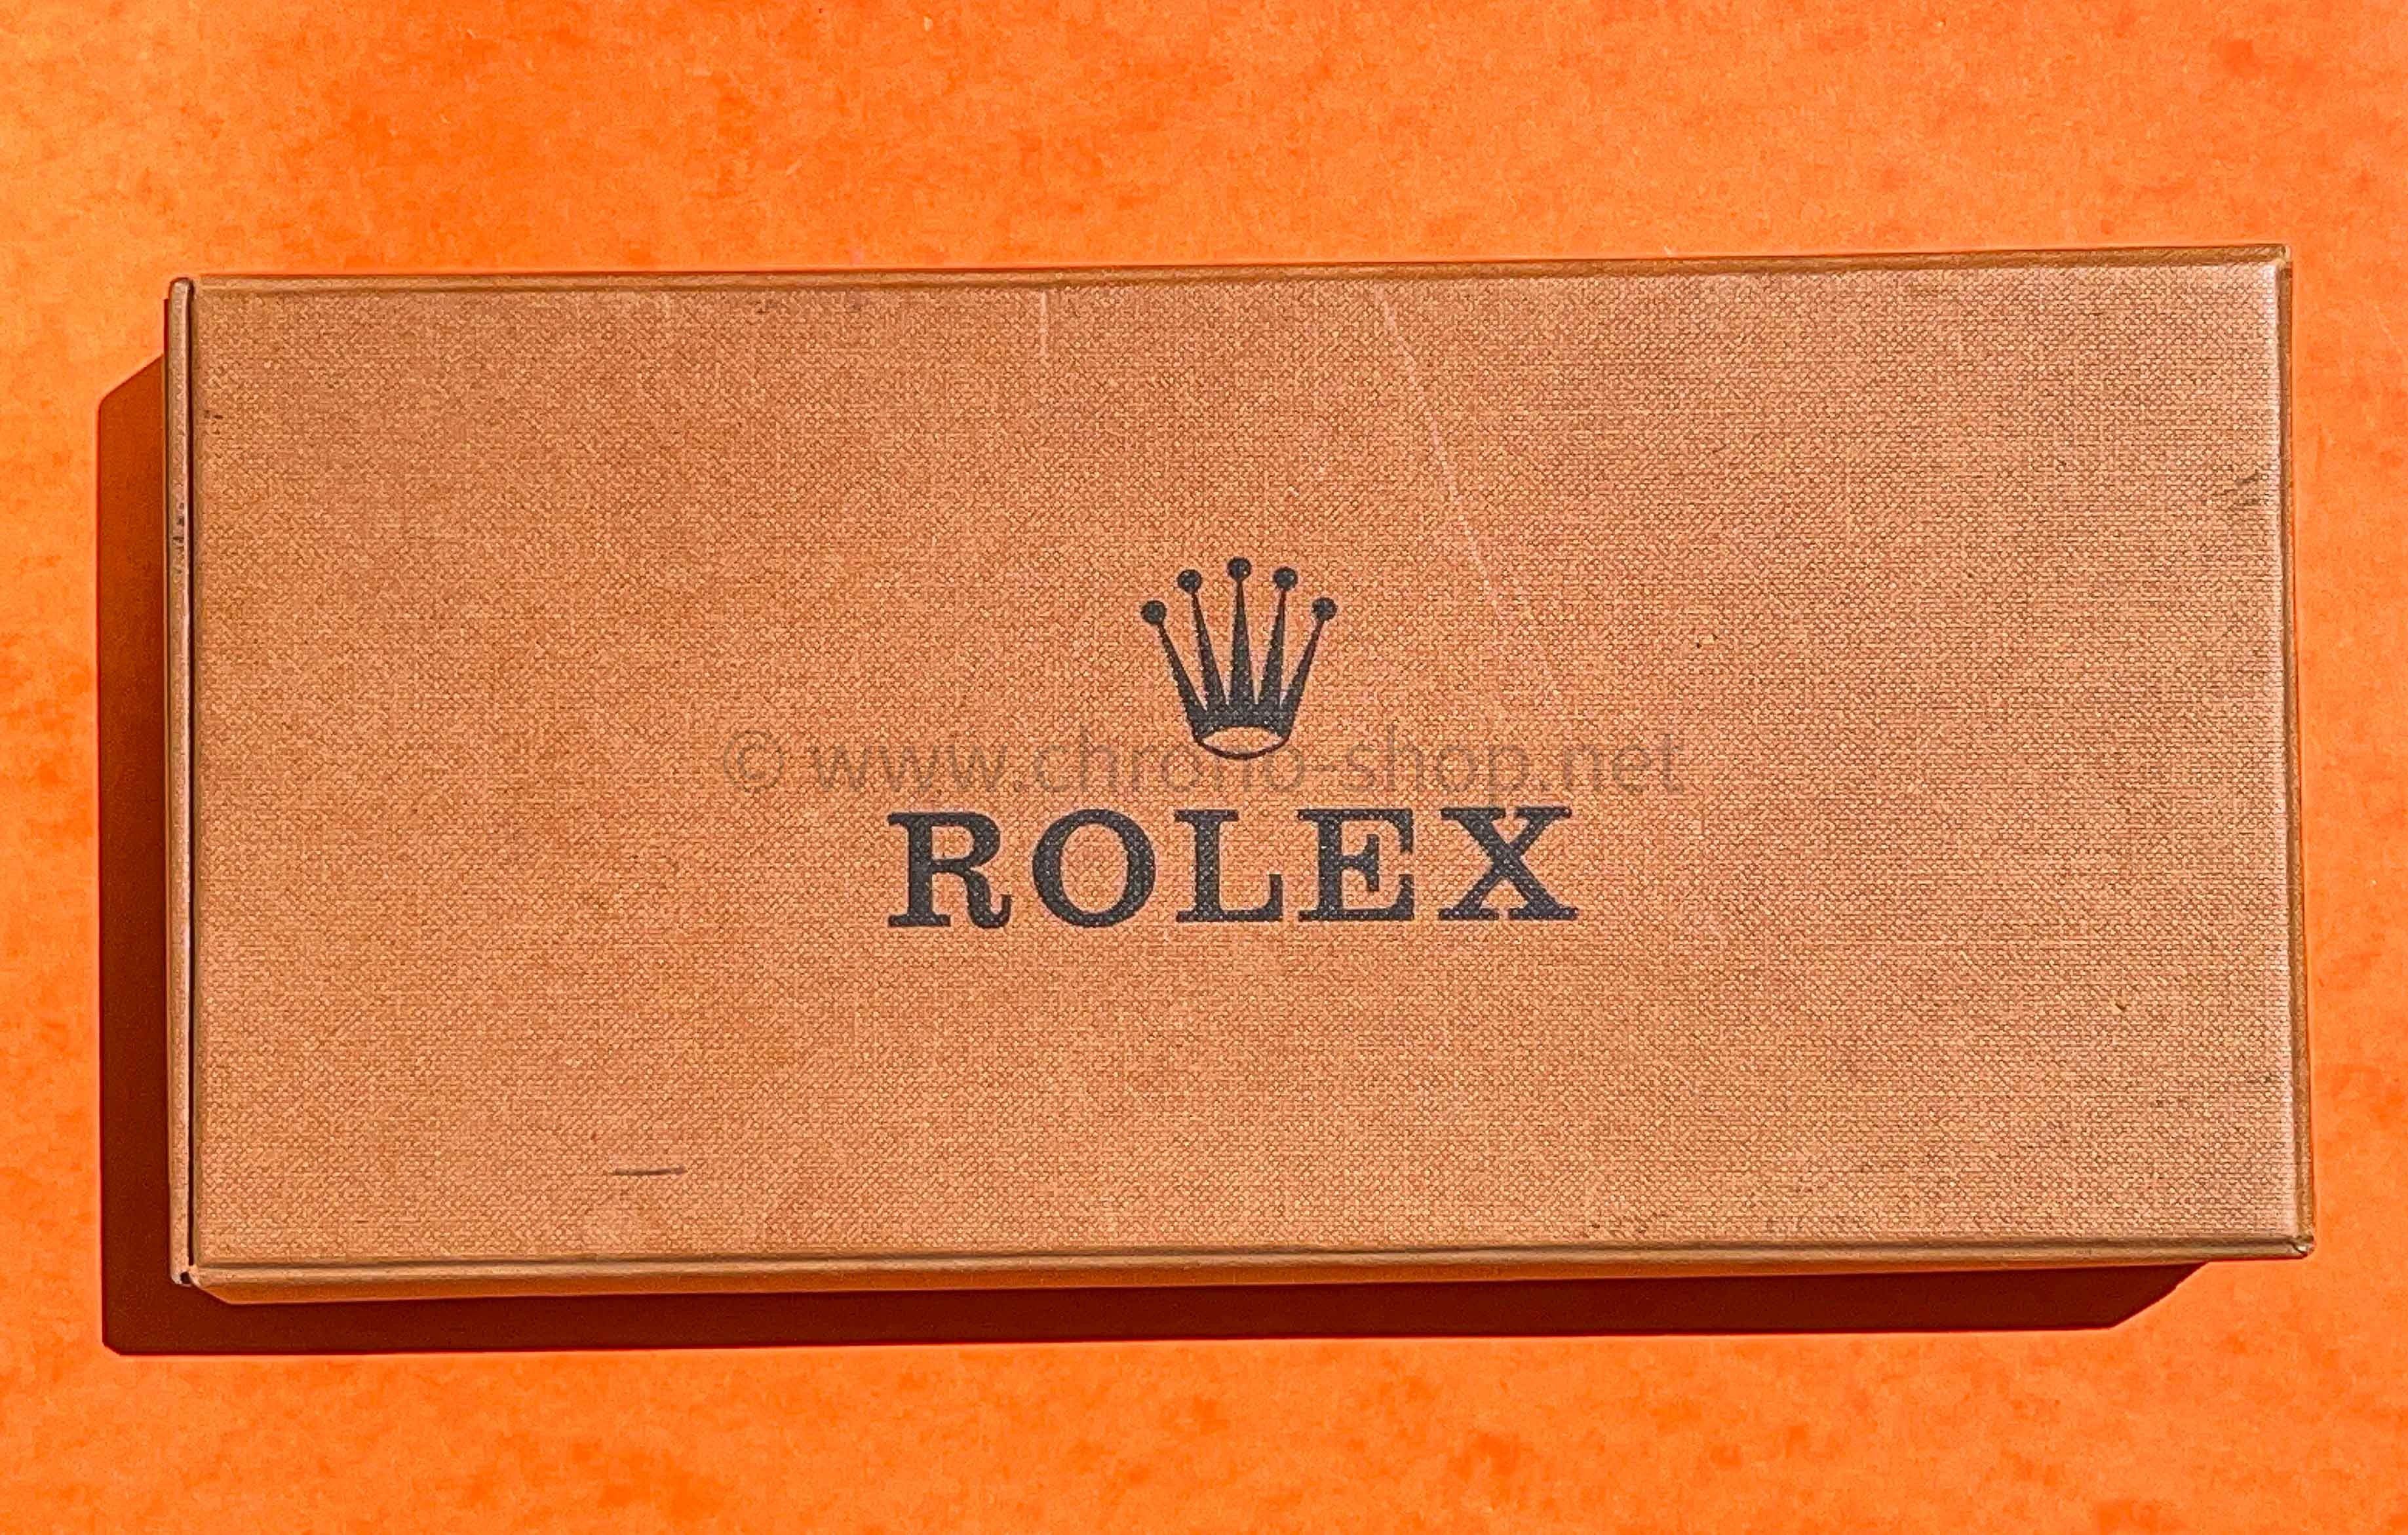 Rolex Collectible Vintage Watch Parts oblong Brown Box tools Display  Containers hands, dials, insert, bezel, horology spares